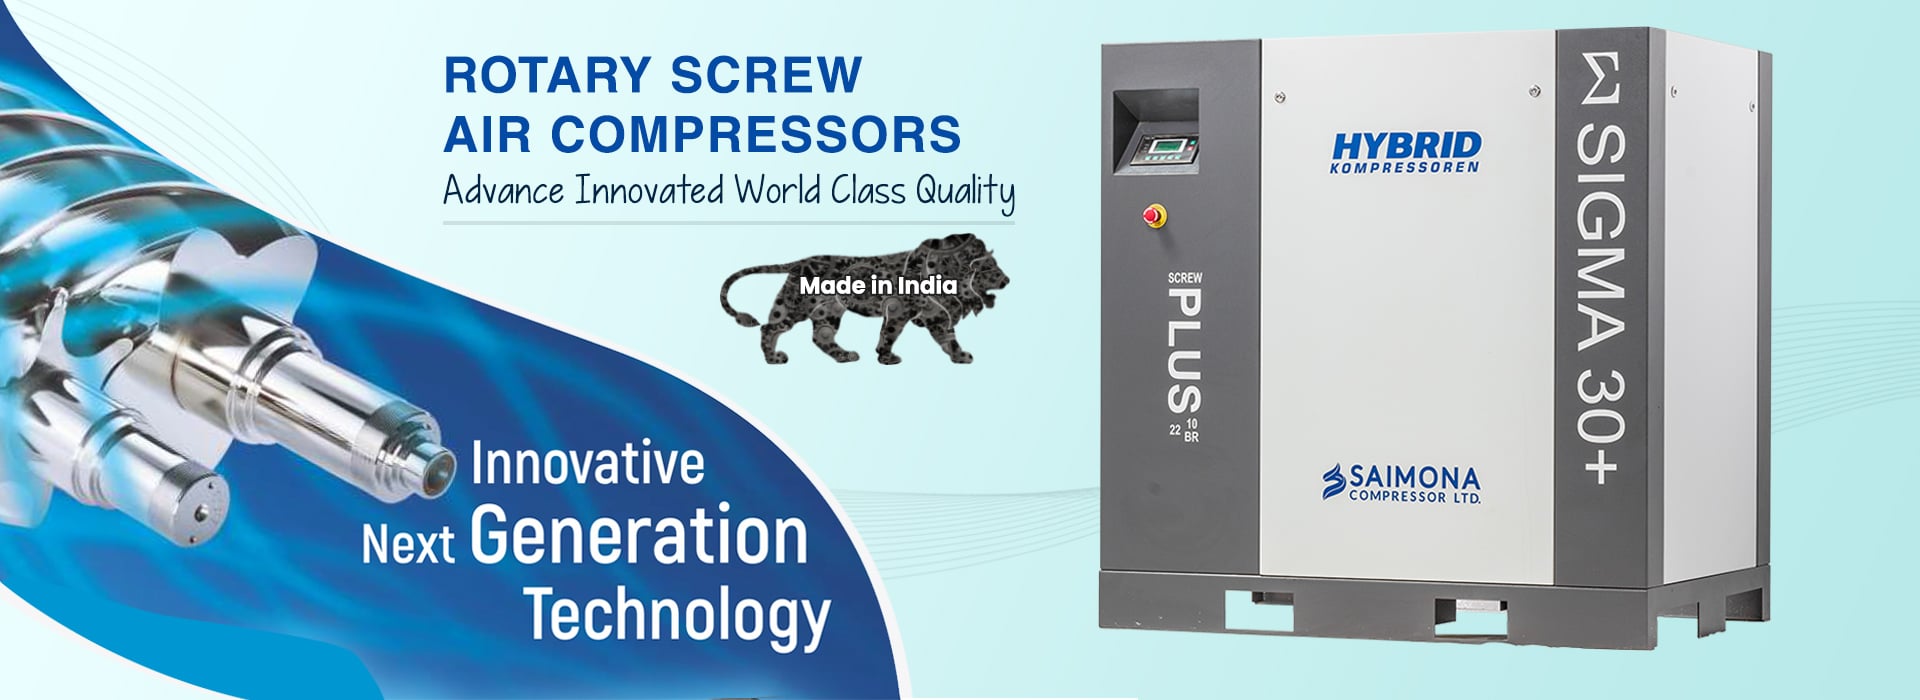 Rotary Screw Air Compressor Manufacturers in Rajasthan, India